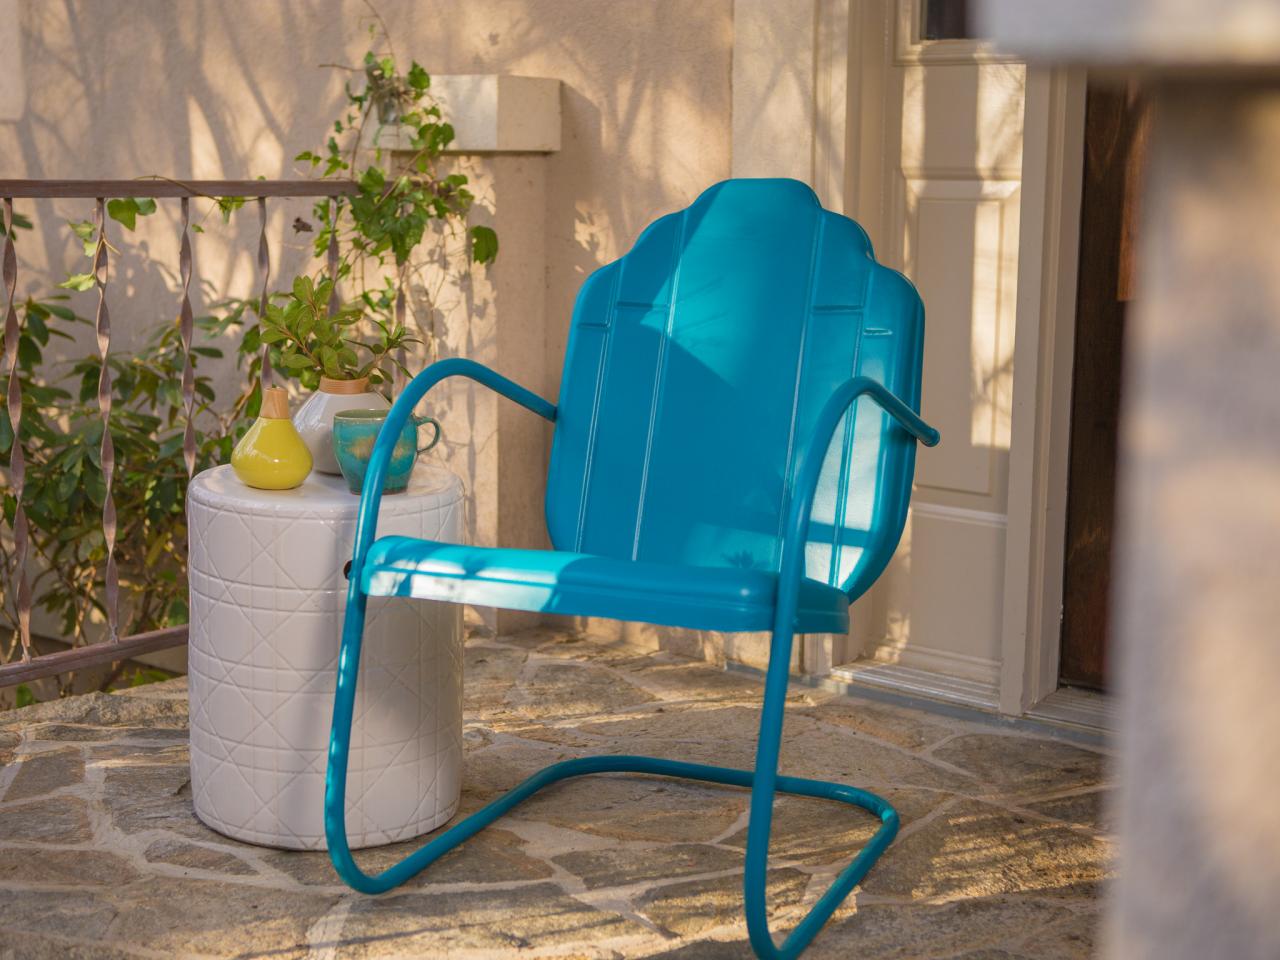 How To Paint An Outdoor Metal Chair, Best Spray Paint To Use On Outdoor Wood Furniture